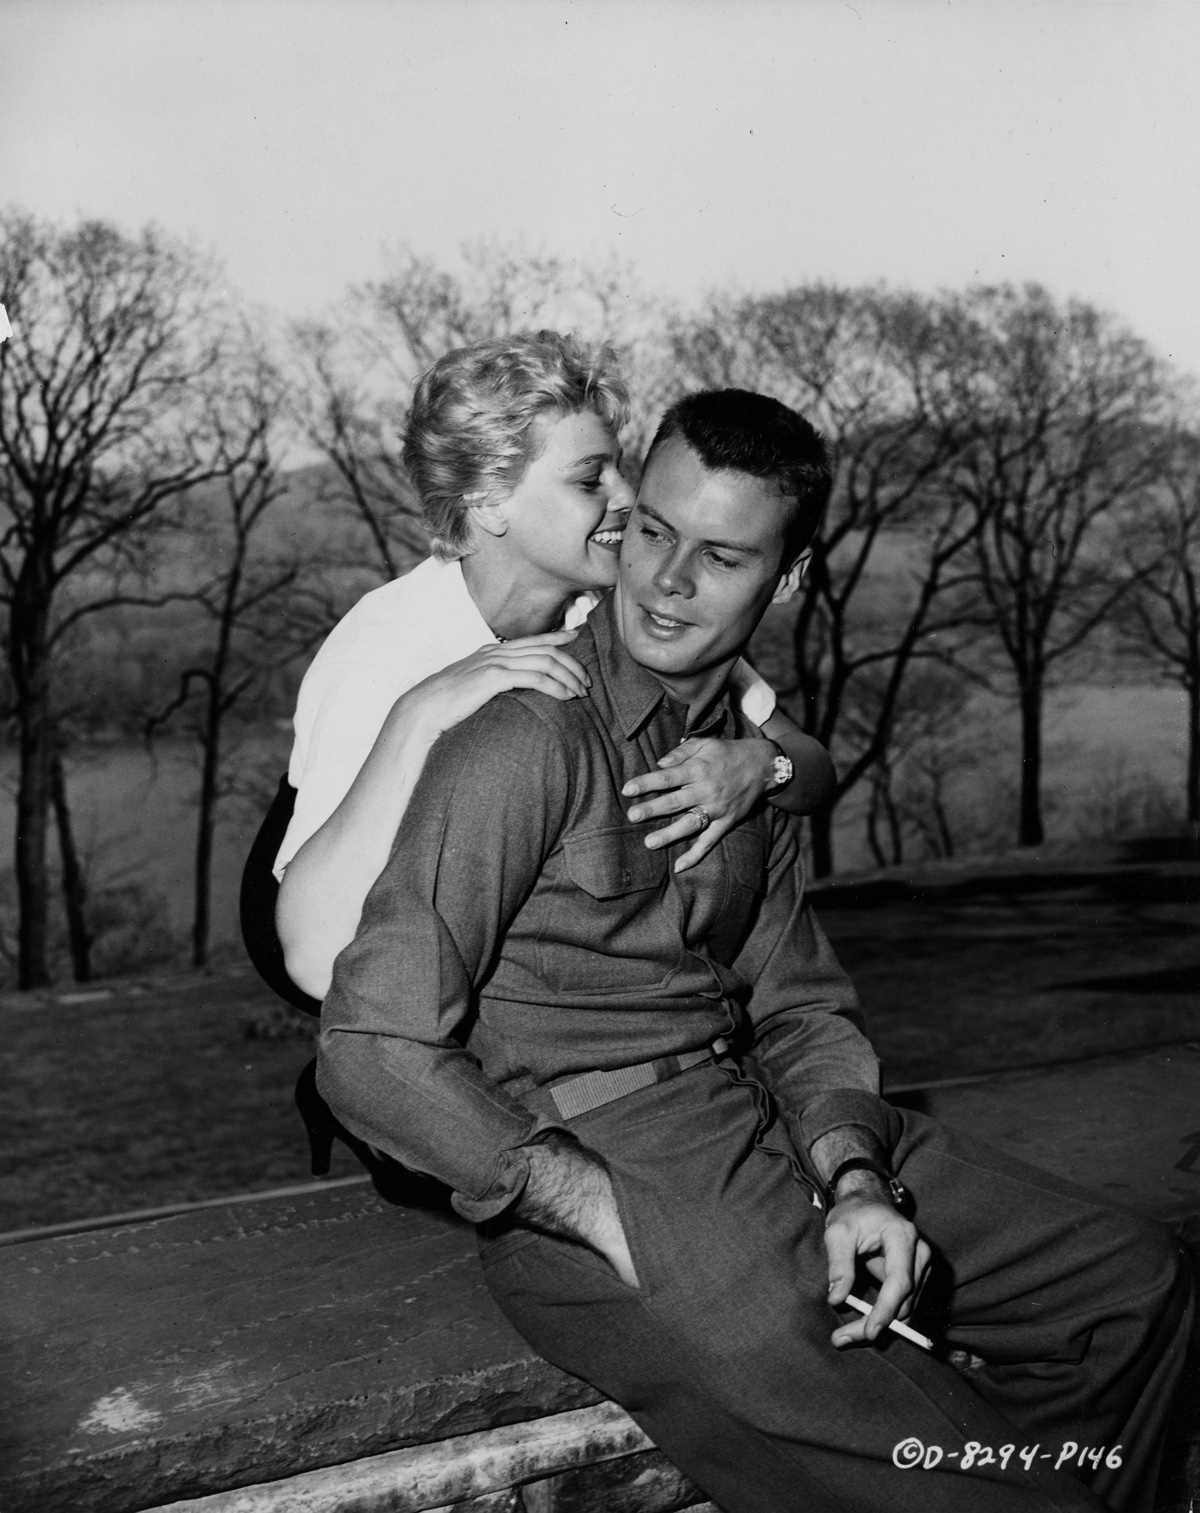  Publicity Photo, Columbia Pictures, West Point, 1954 “A SECRET - Betsey Palmer whispers something to Bob Francis between scenes on location at West Point….” 